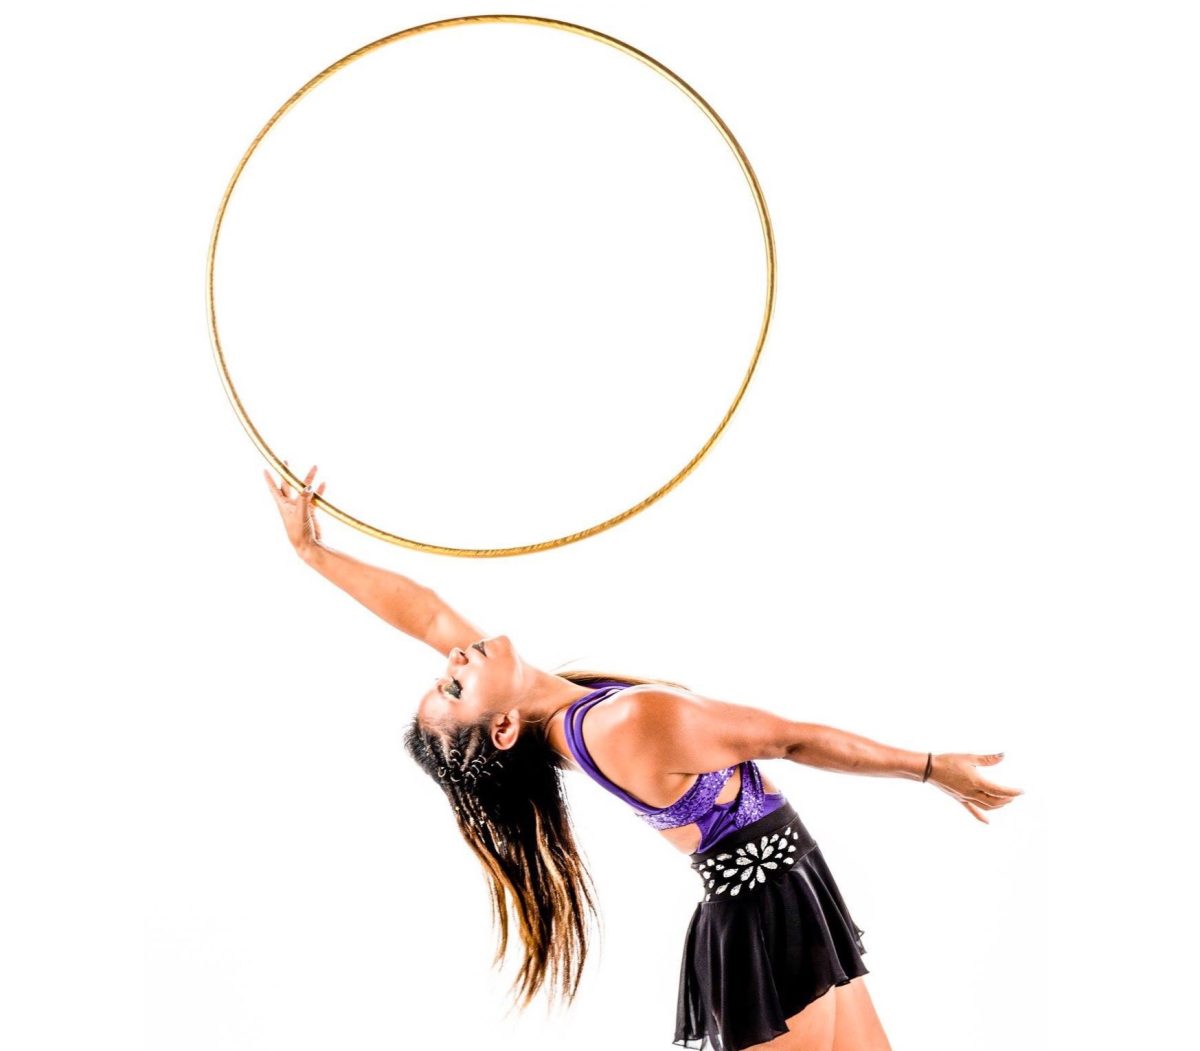 circus artist with hoop